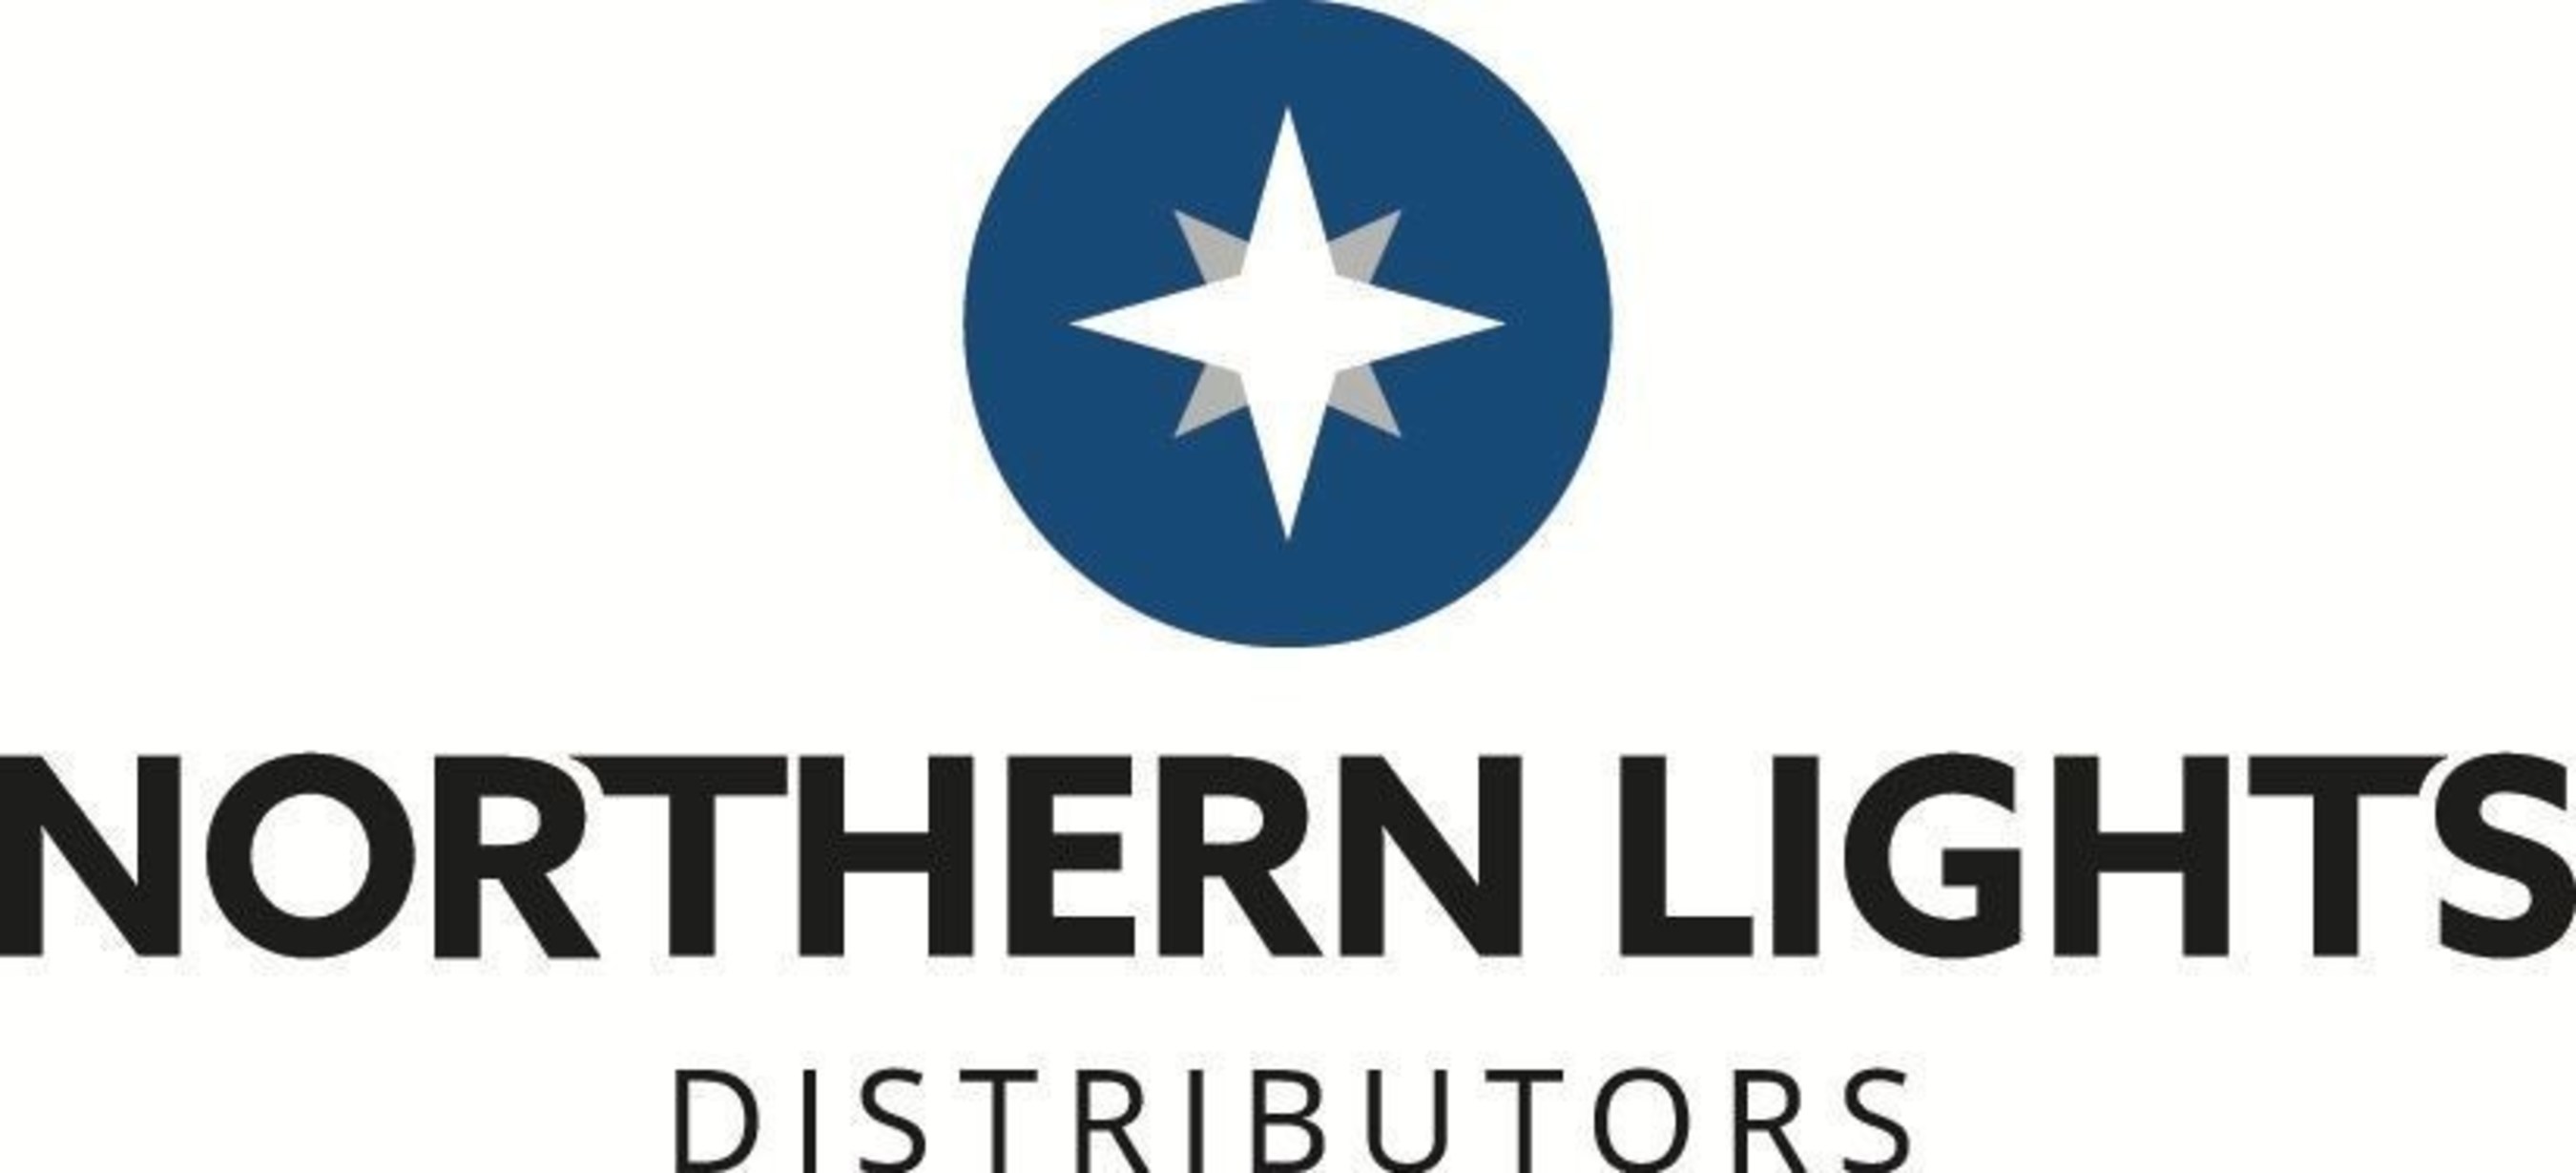 Northern Lights Distributors, LLC ("NLD") is a broker-dealer specializing in providing comprehensive, advisor-driven fund distribution solutions. Driven by their mission to help advisors navigate the distribution universe, NLD serves as an engaged partner empowering over 100 investment advisors to focus their time on active fund distribution. NLD's primary distribution services include: providing access to hundreds of established selling agreements, processing 12b-1 payments, facilitating NSCC trading and administering advertising review and submission with the Financial Industry Regulatory Authority Inc. ("FINRA").